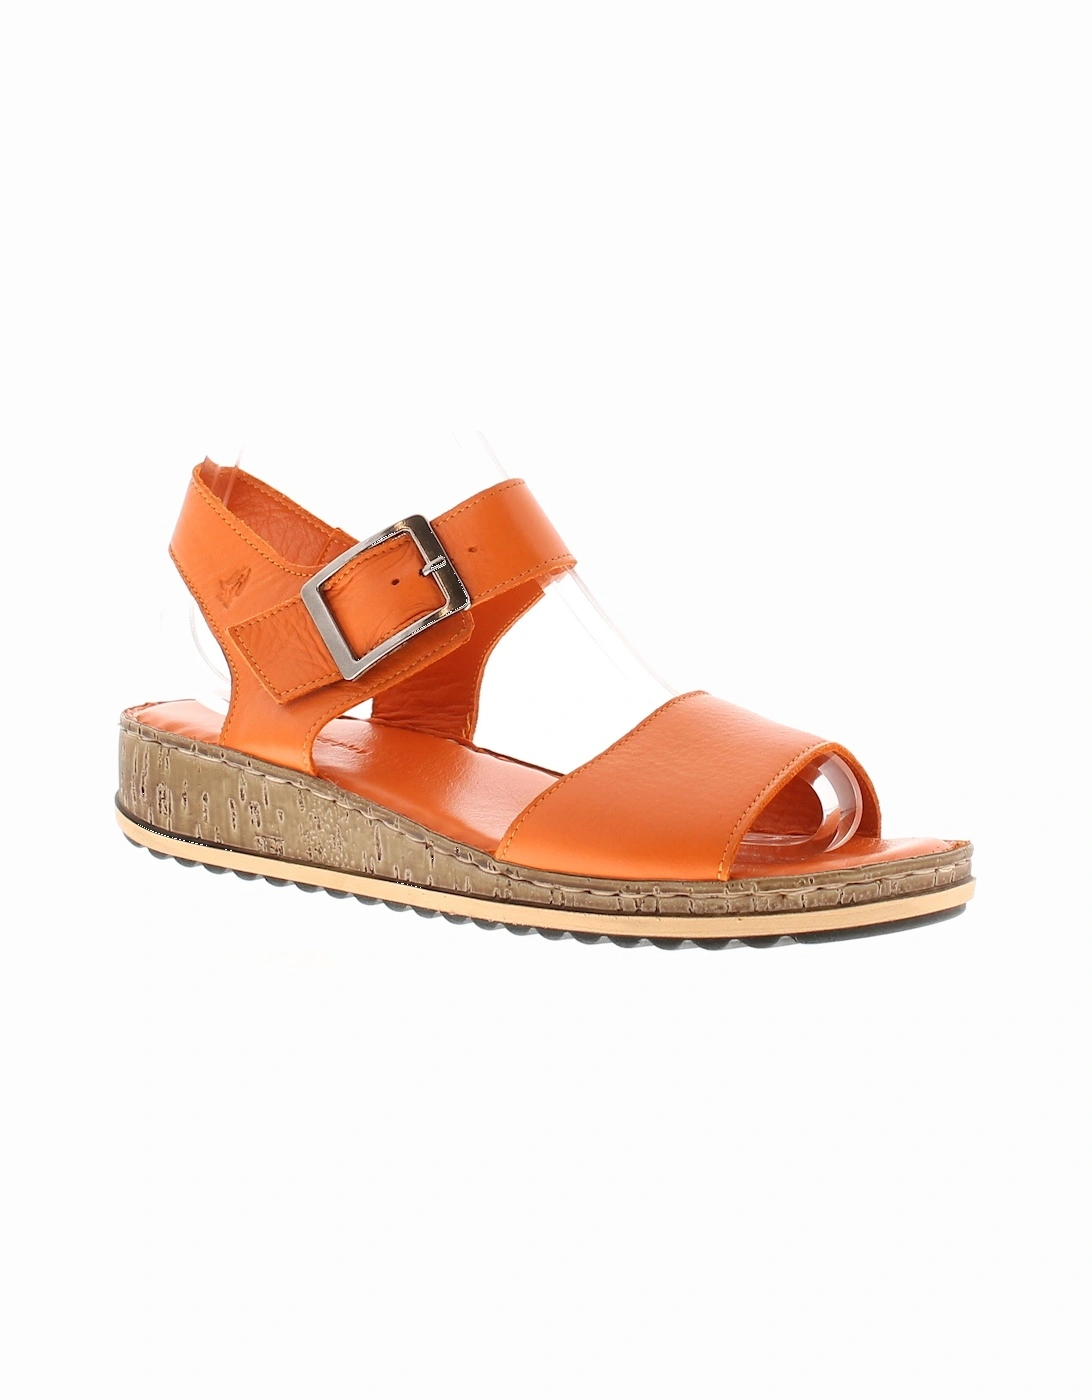 Womens Sandals Low Wedge Ellie Leather Buckle orange UK Size, 6 of 5